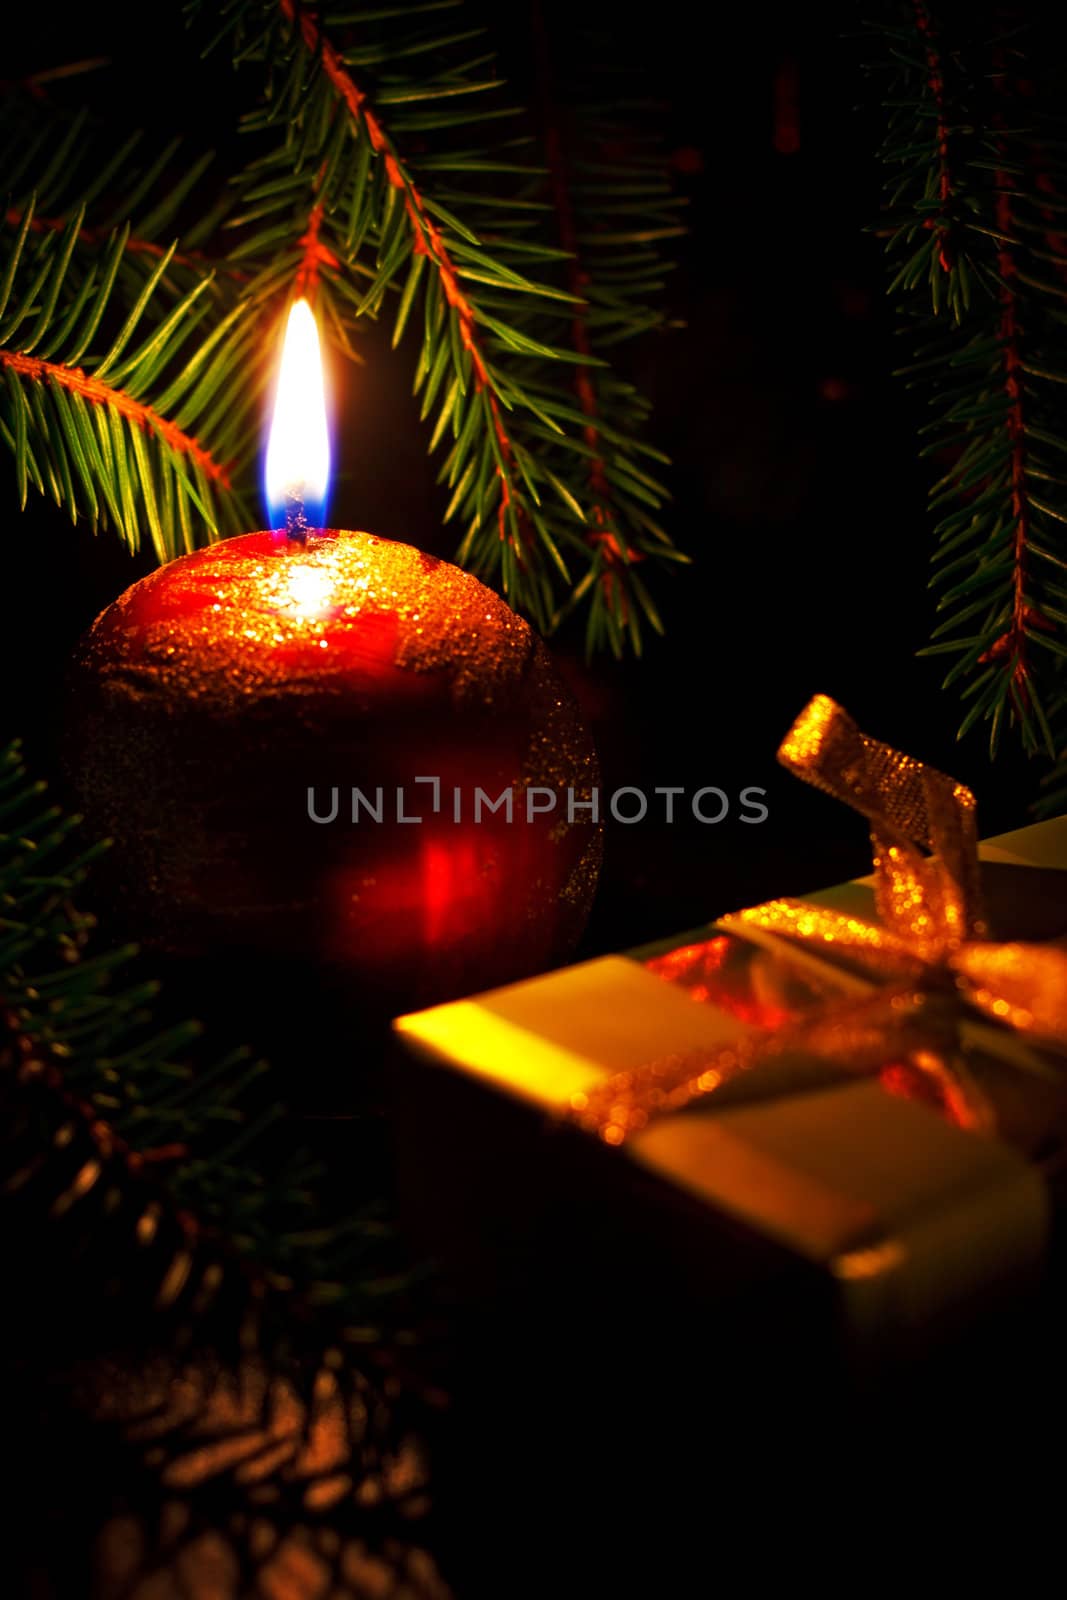 christmas card with candle and gift box